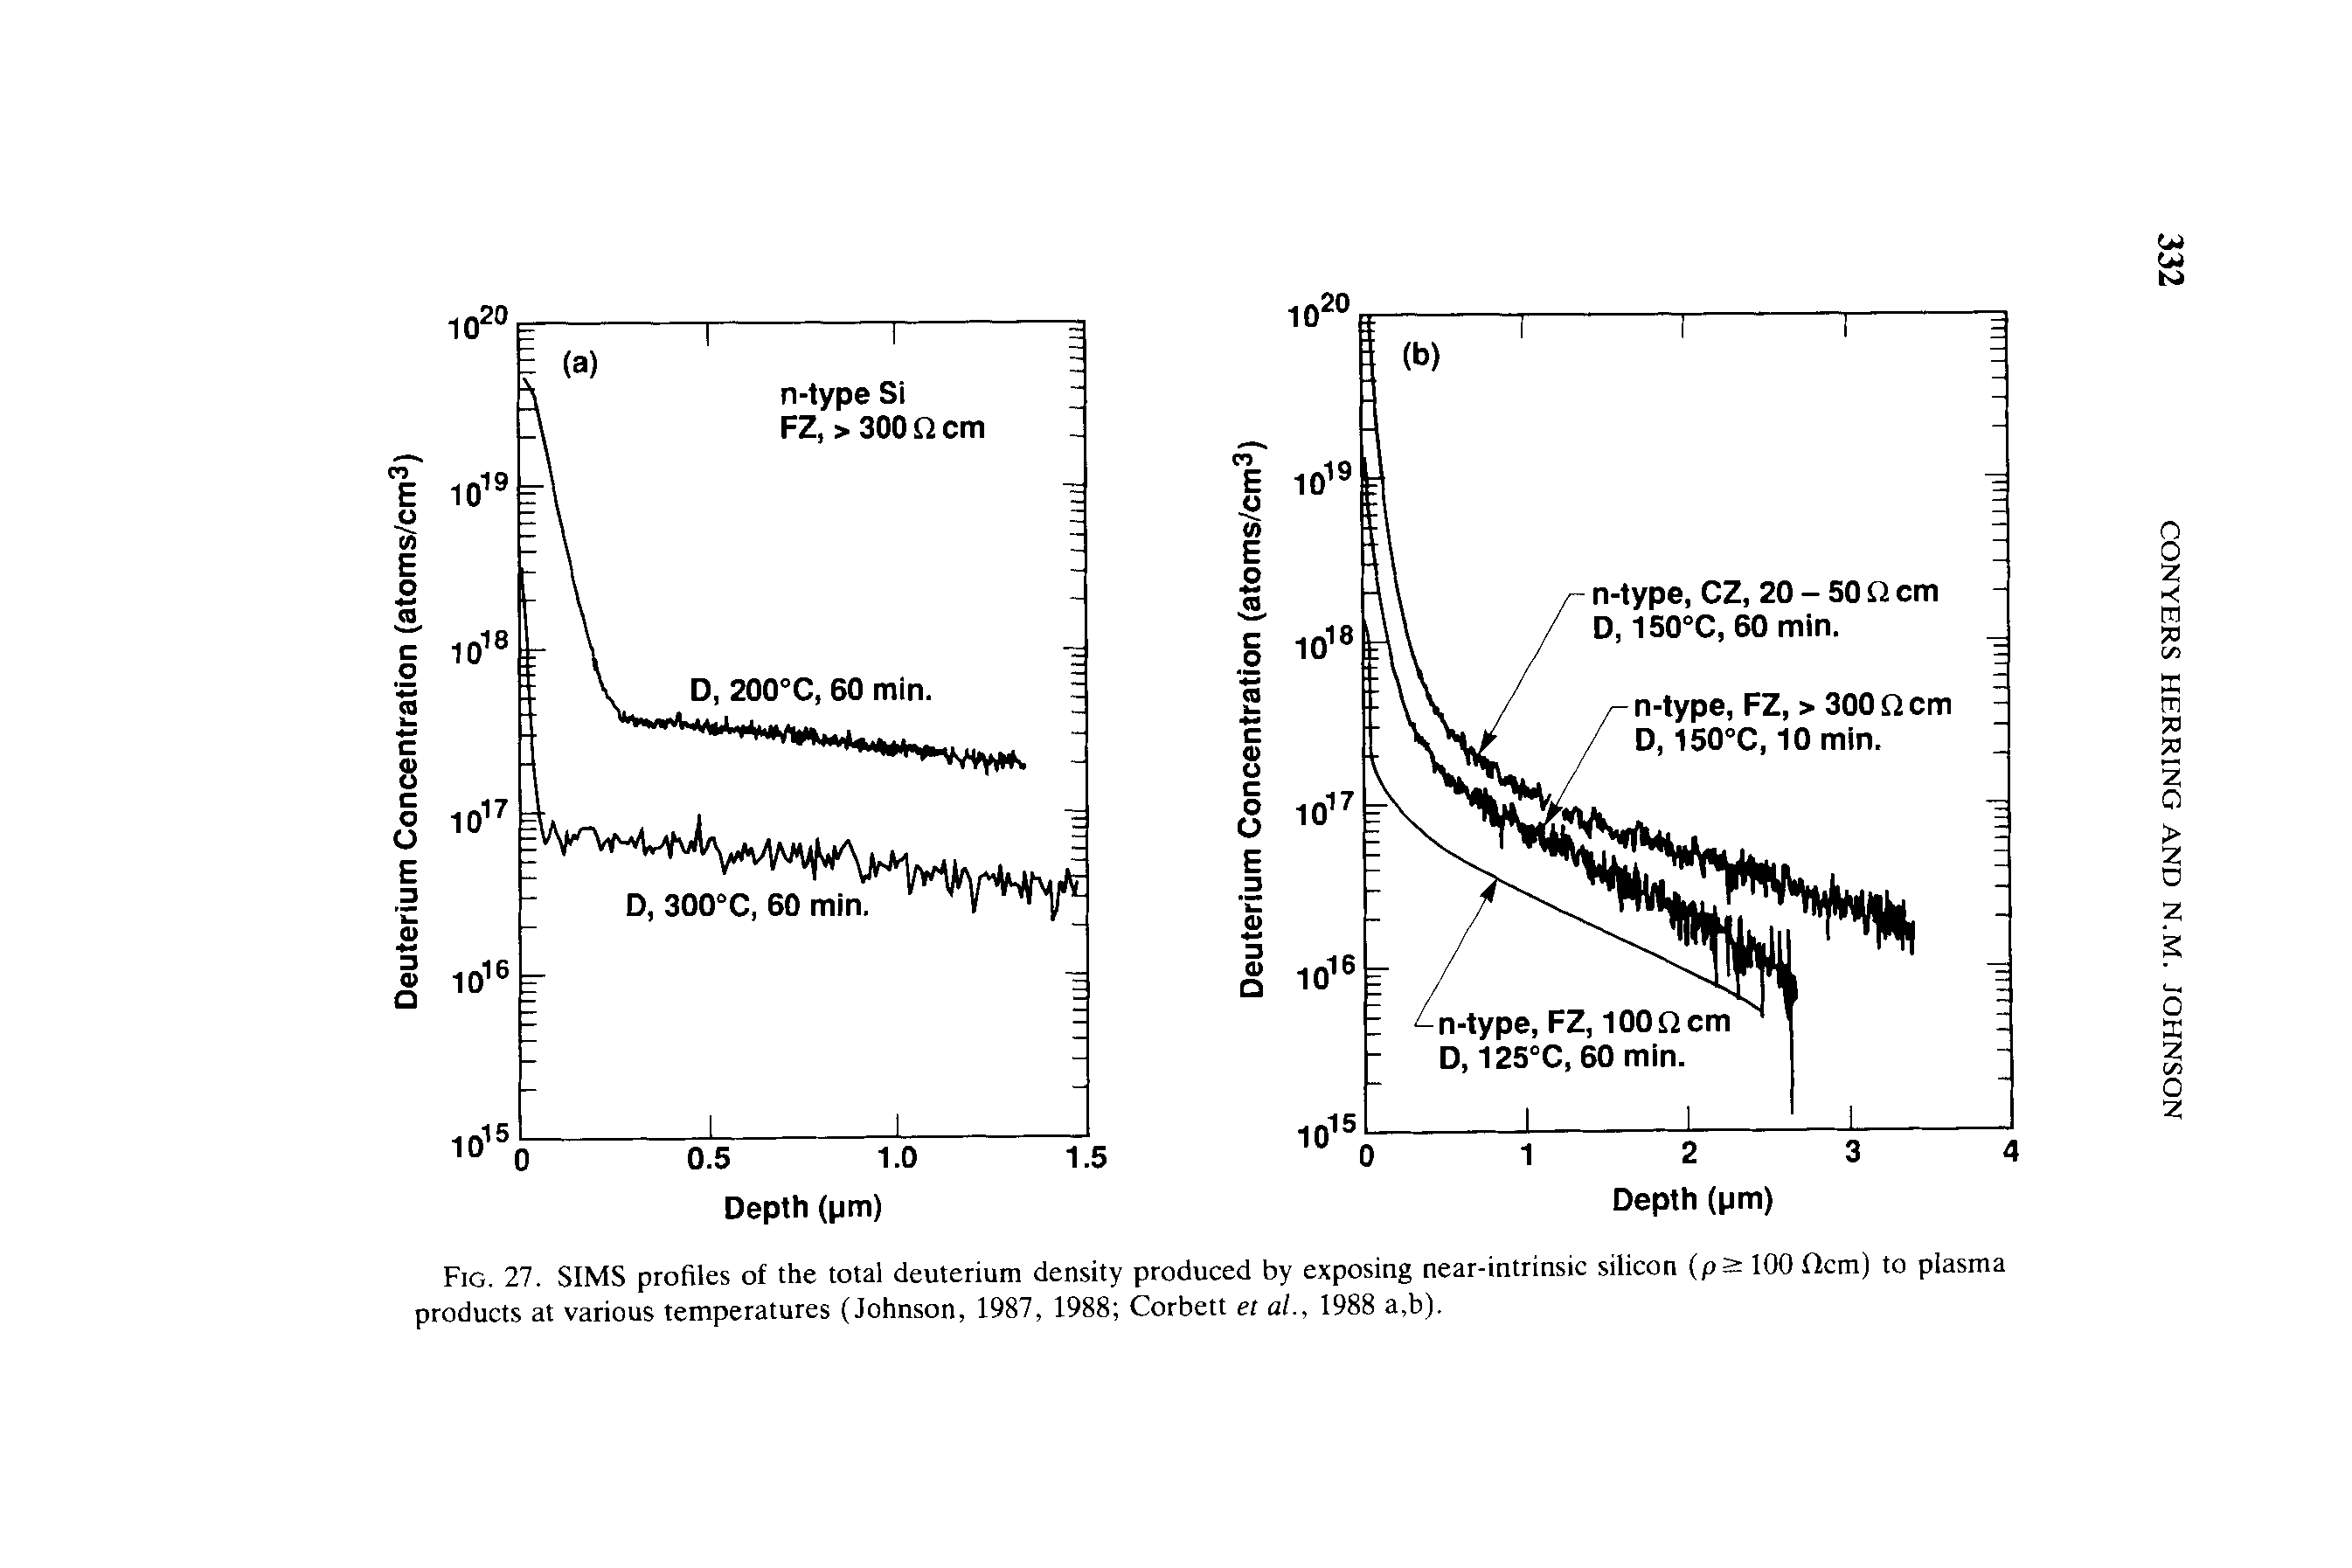 Fig. 27. SIMS profiles of the total deuterium density produced by exposing near-intrinsic silicon (pa 100 flcm) to plasma products at various temperatures (Johnson, 1987, 1988 Corbett et al., 1988 a,b).